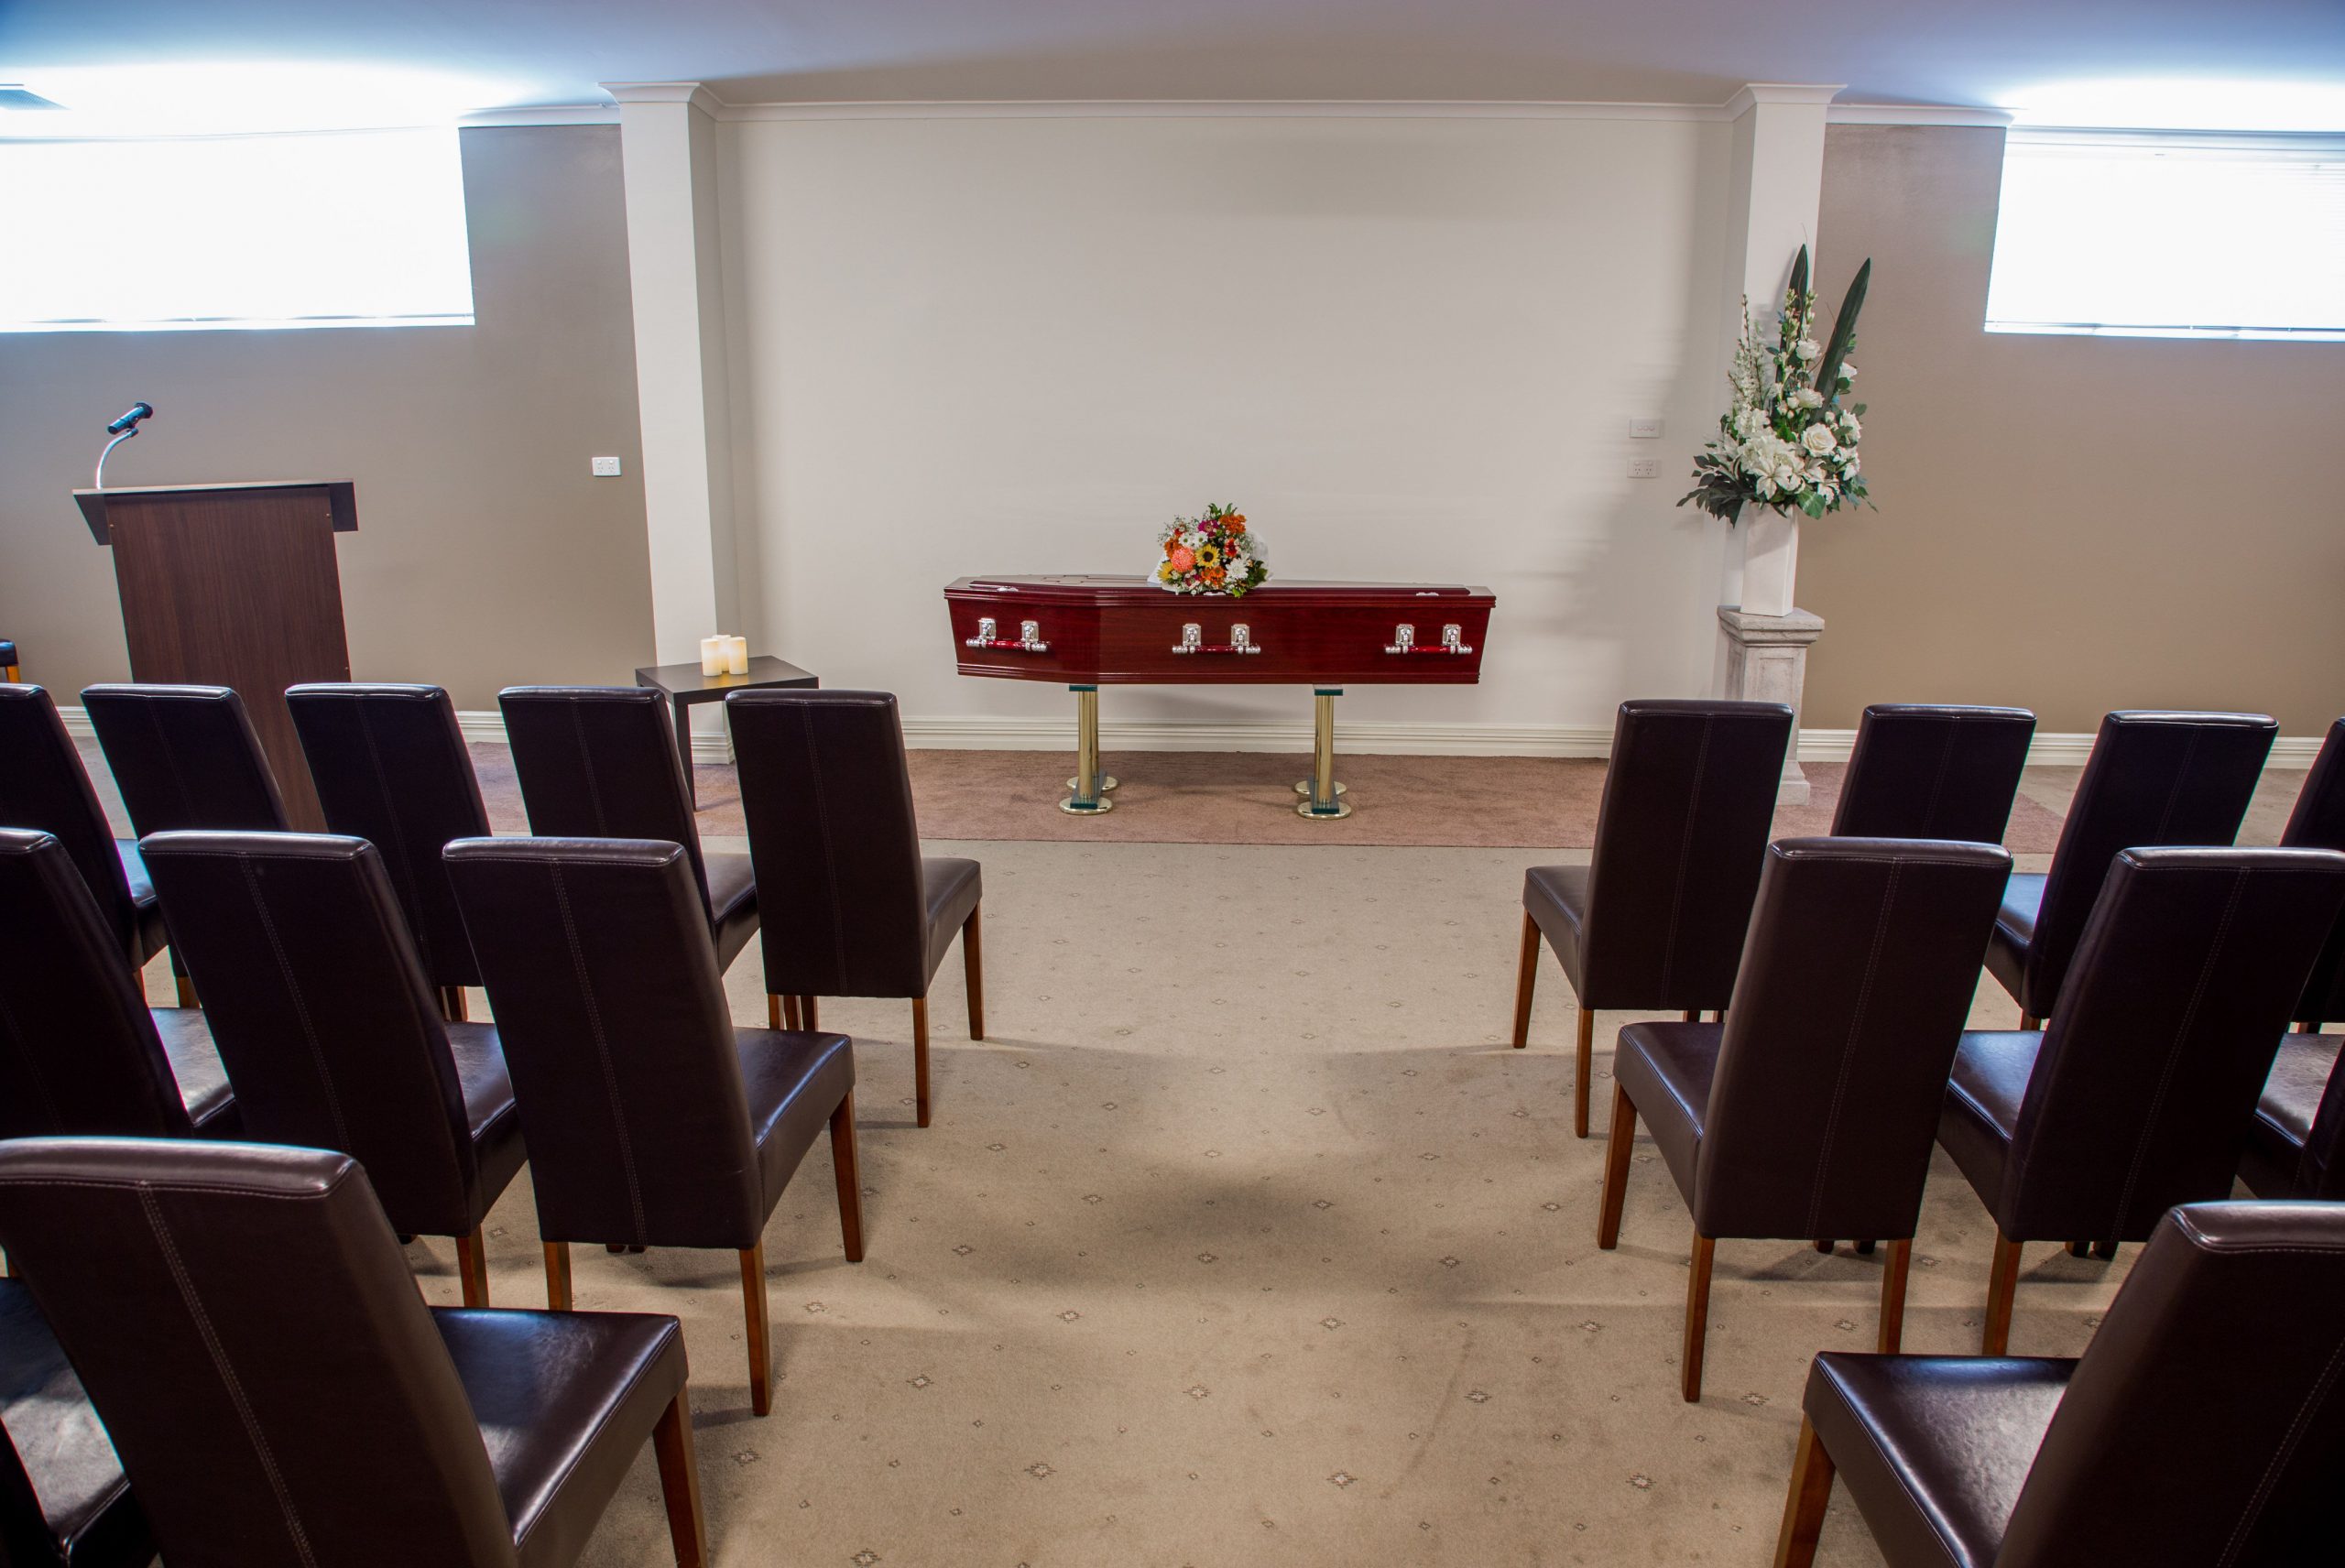 Fulham-Funerals-Underdale-Chapel-scaled.jpg